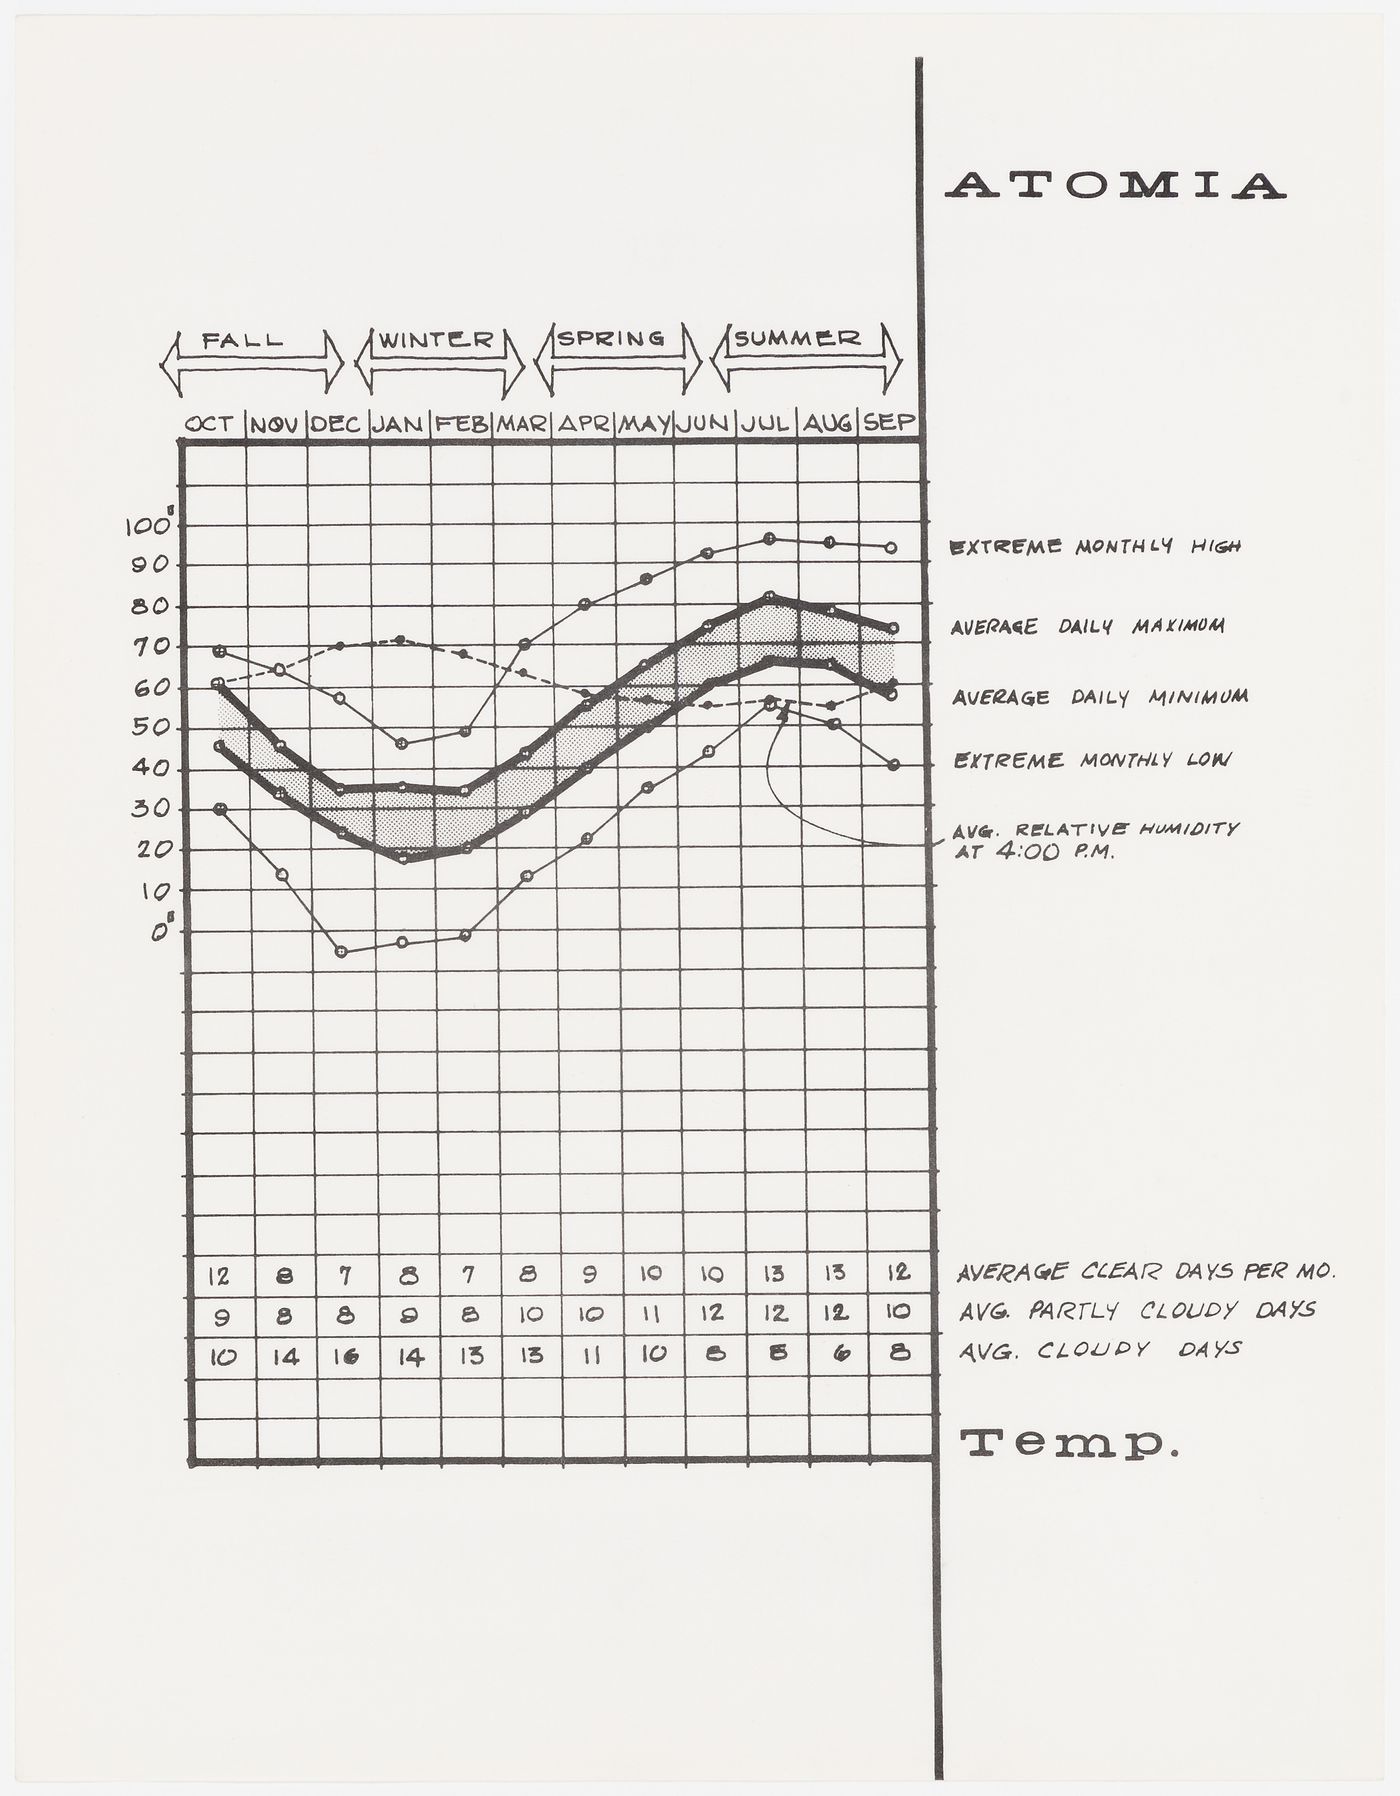 Atomia: chart with statistics related to temperature (document from the Atom project records)